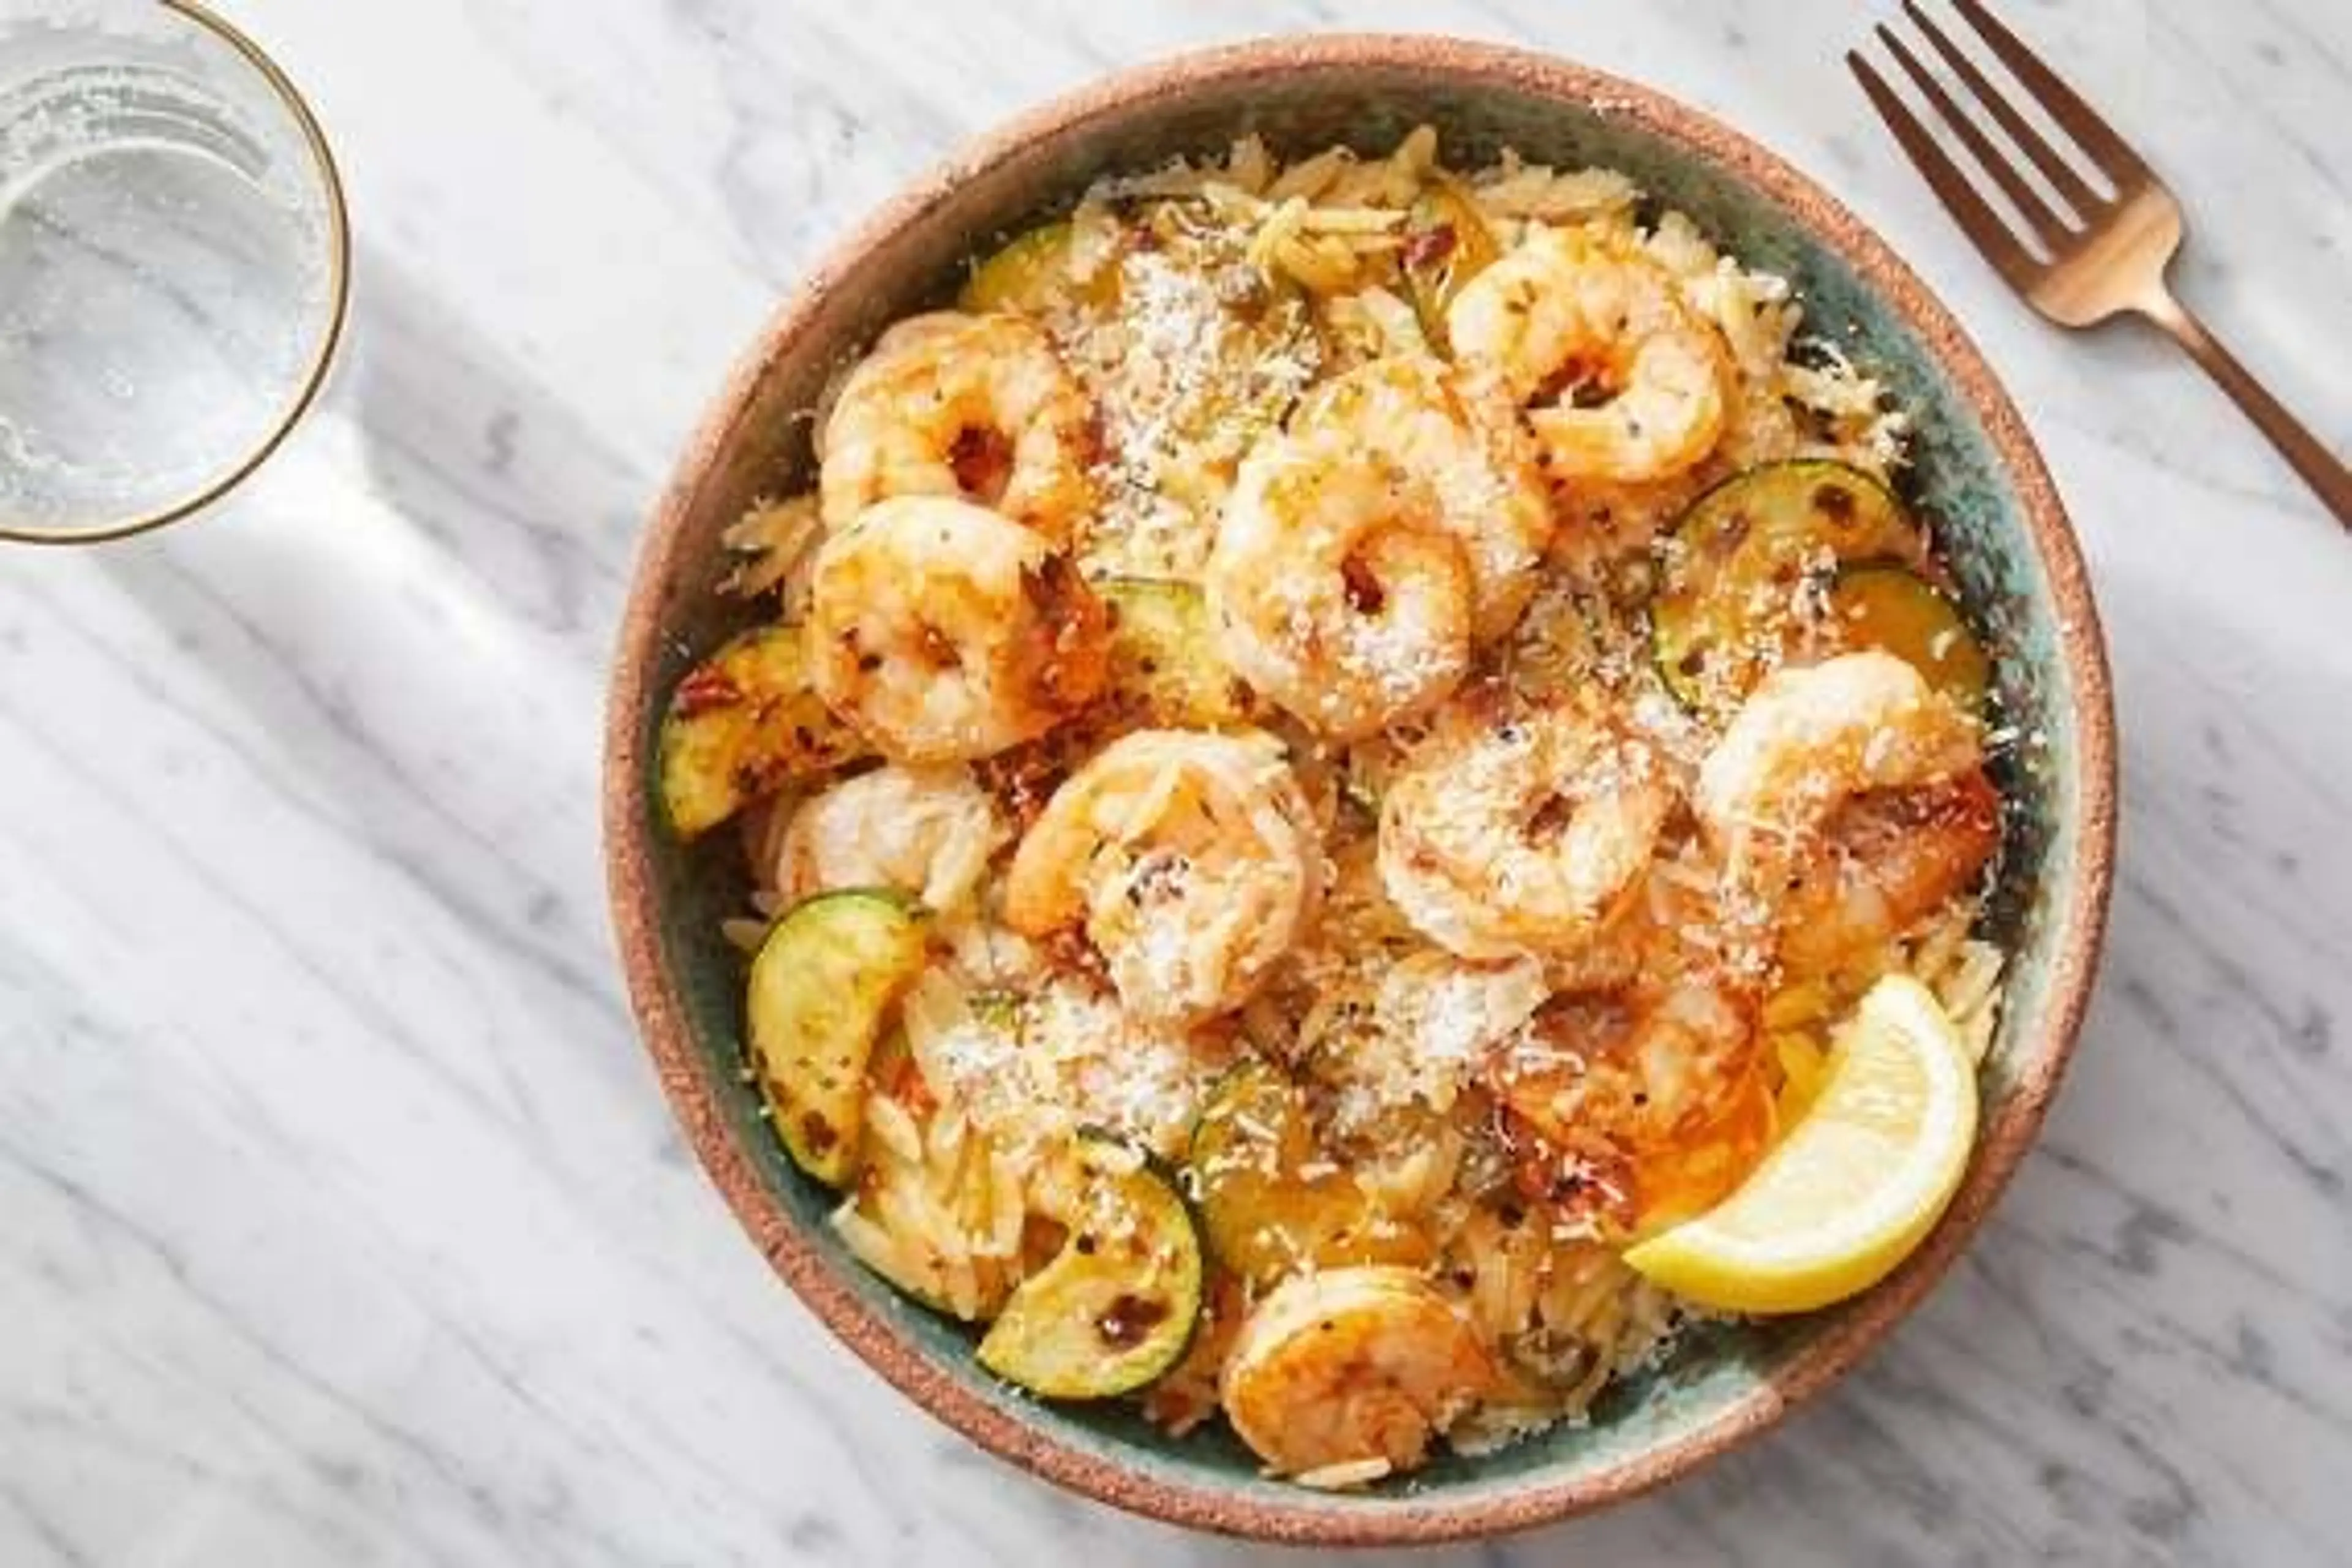 Calabrian Shrimp & Orzo with Zucchini & Parmesan